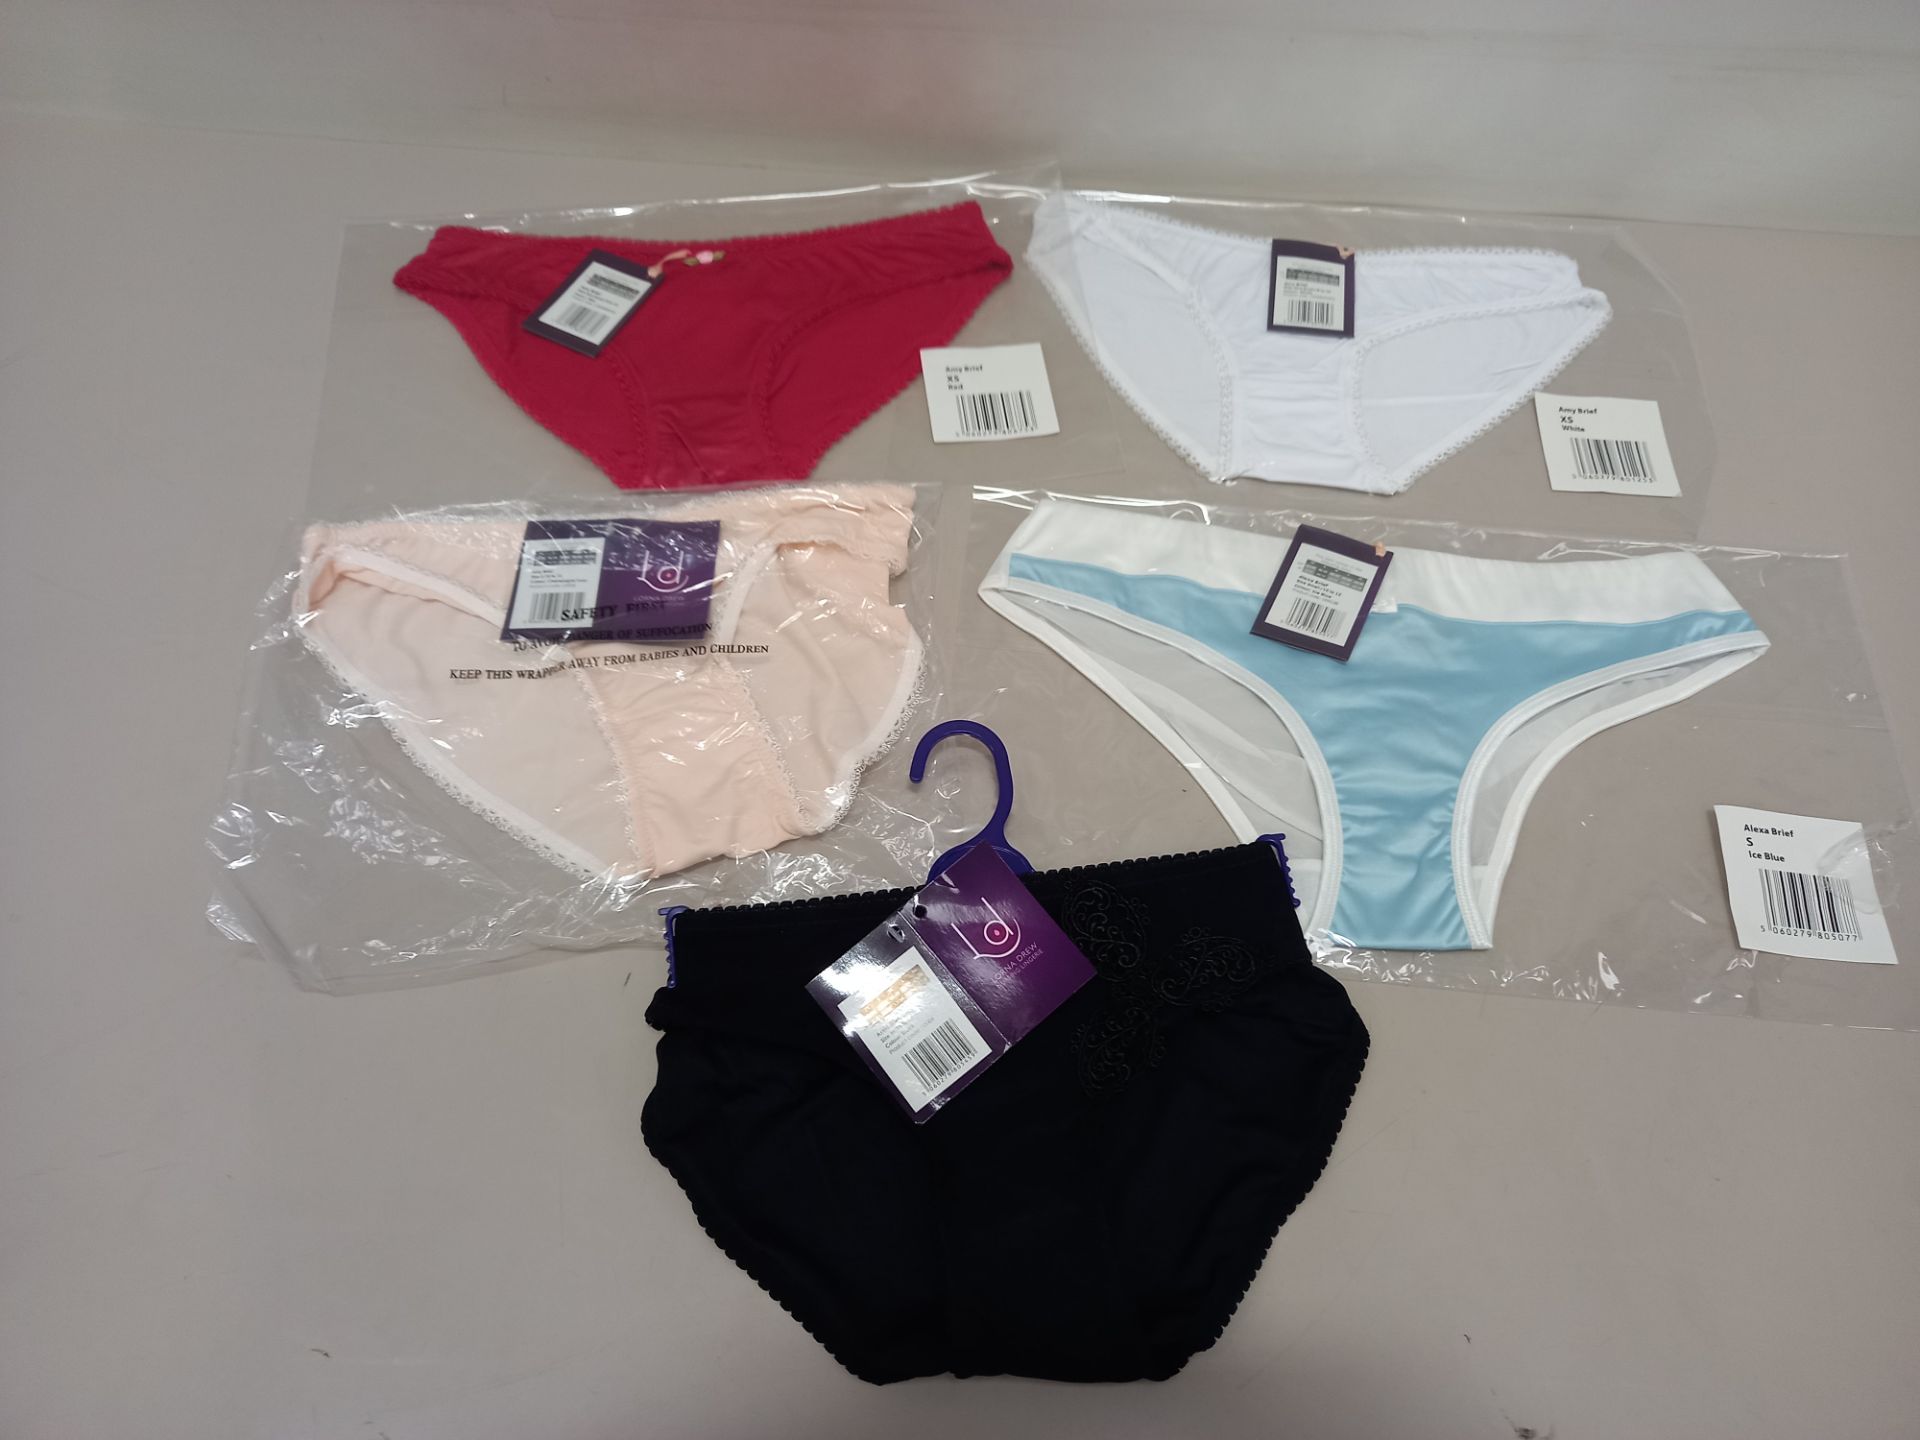 50 X BRAND NEW LORNA DREW LINGERIE BRIEFS IN VARIOUS STYLES AND SIZES IE ASTRID BRIEFS, AMY BRIEFS